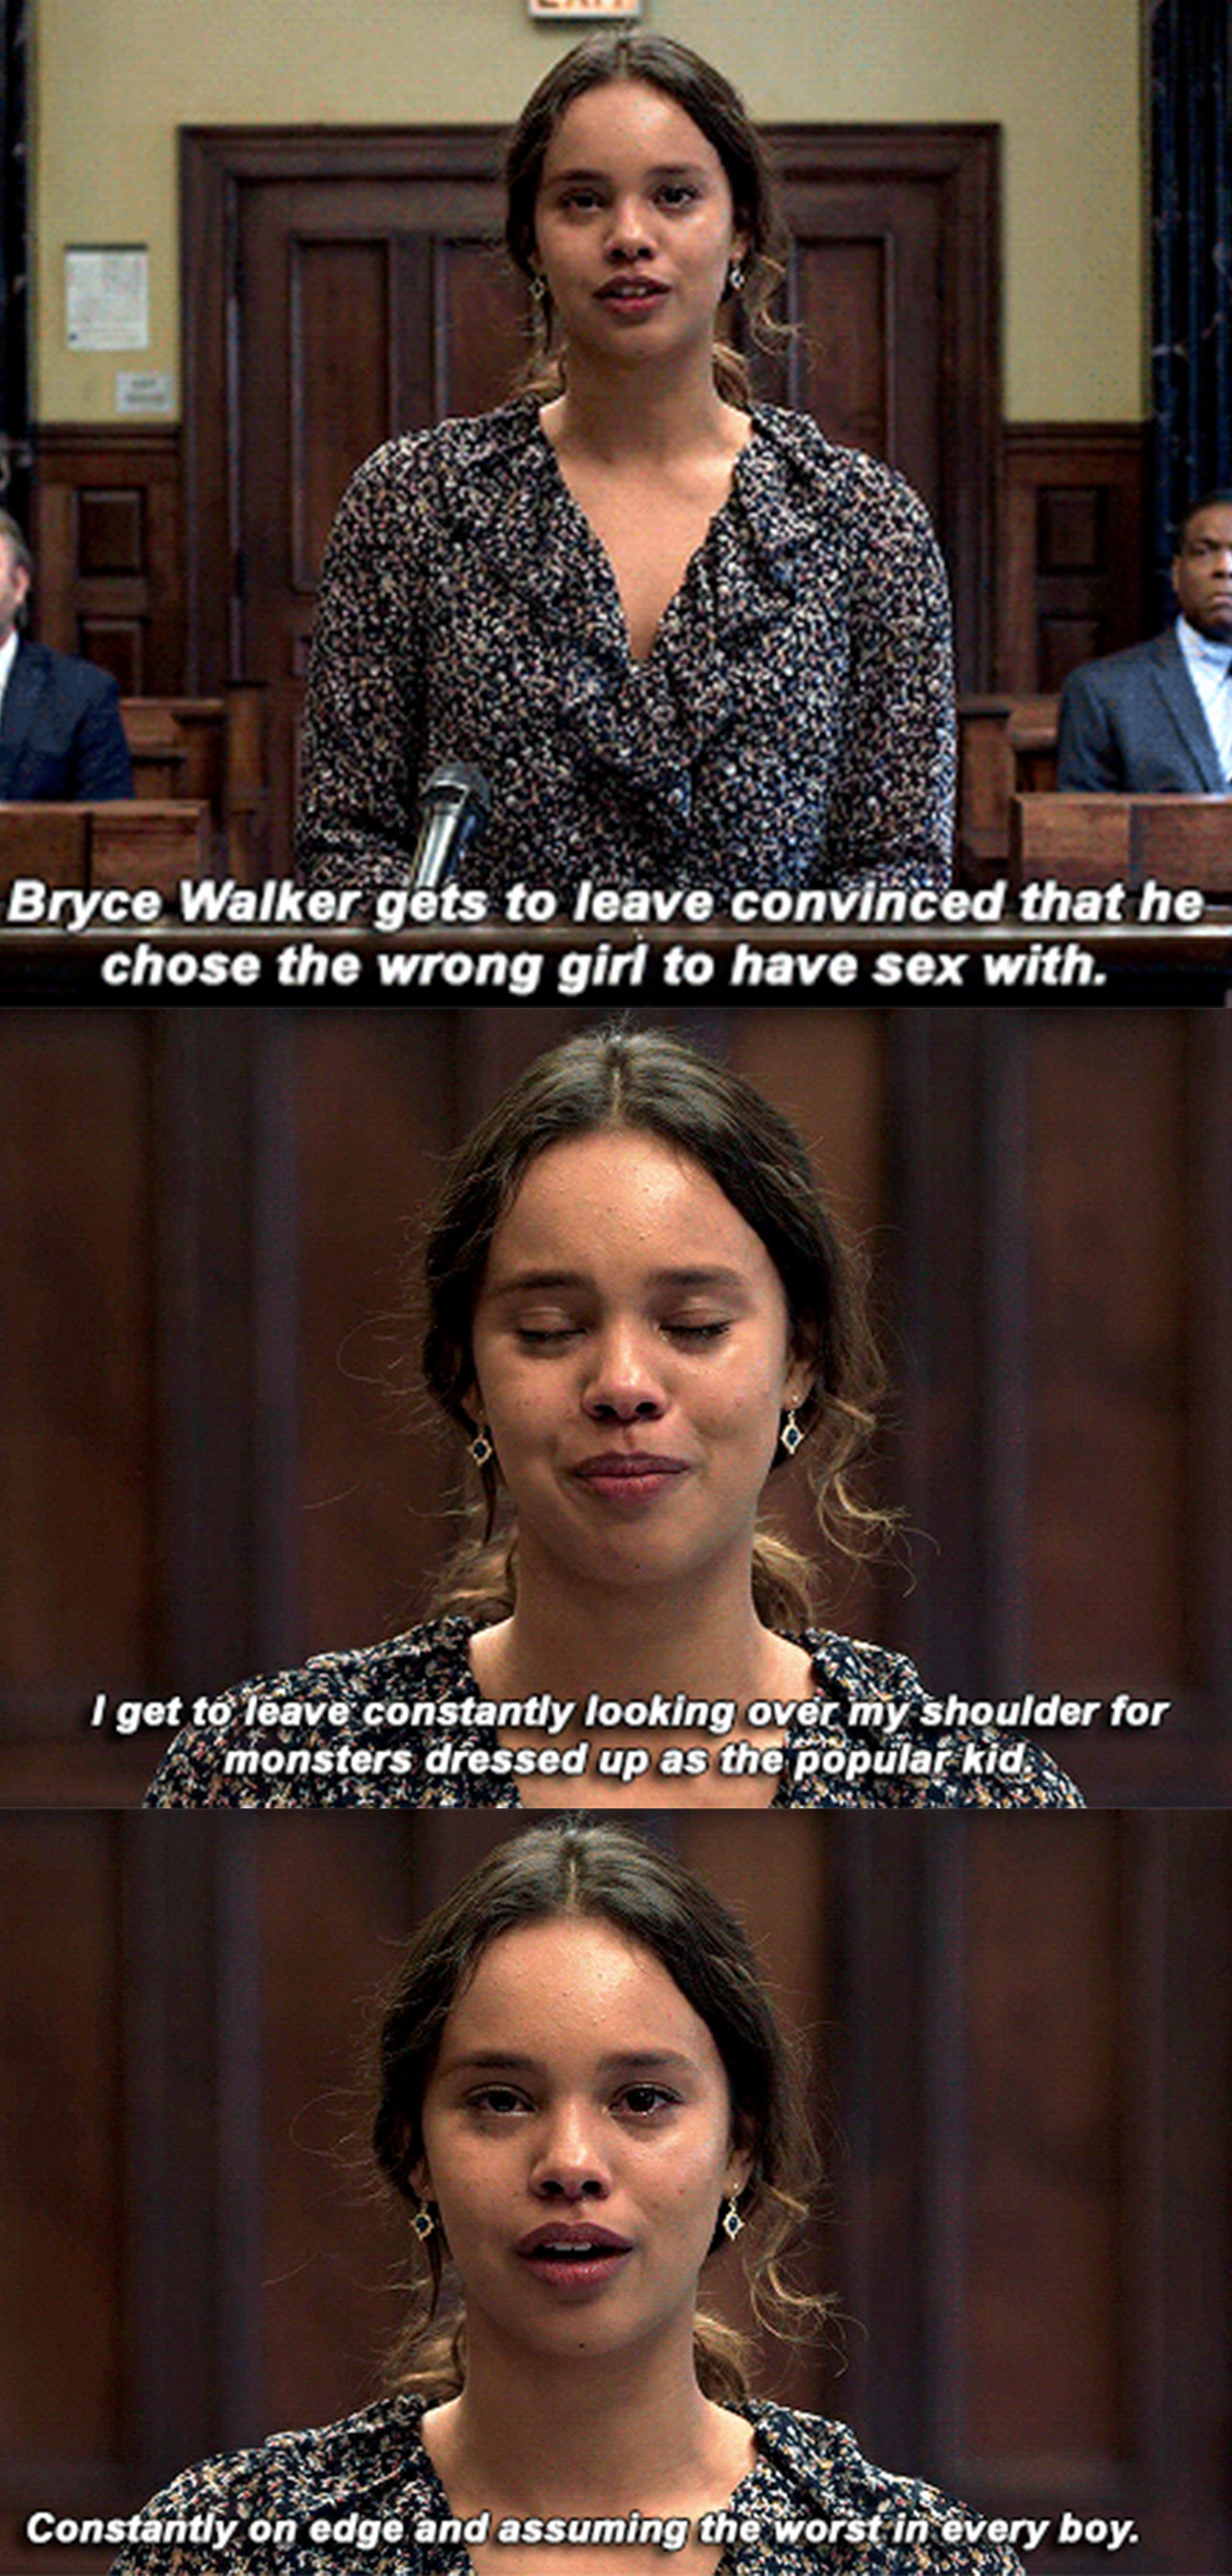 Jessica speaking at her trial against Bryce